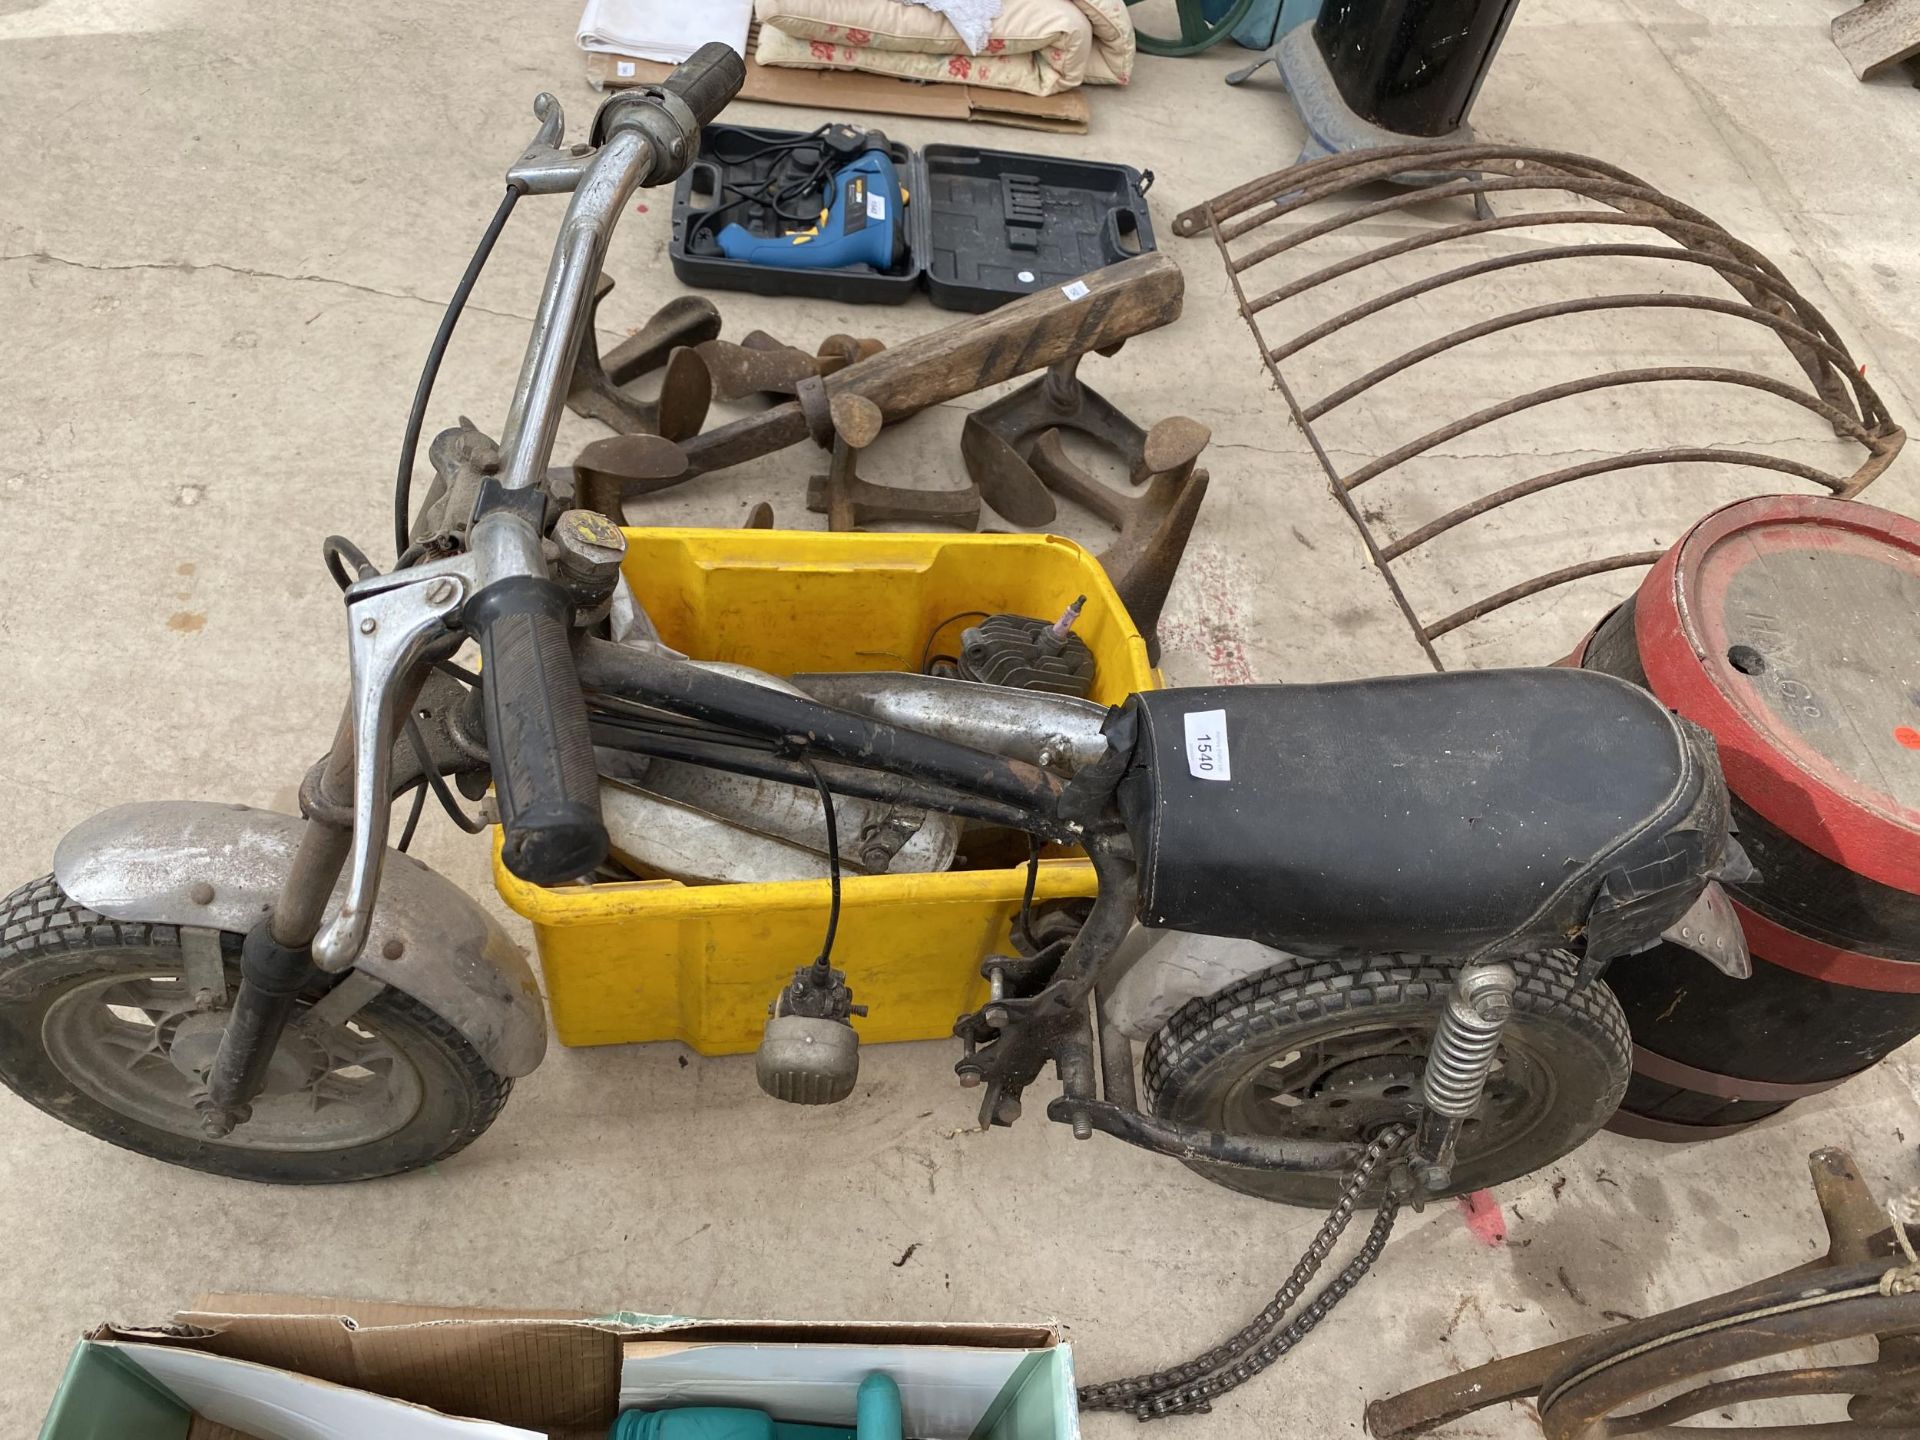 A SMALL MOTORBIKE AND SPARE PARTS FOR RESTORATION - Image 2 of 6